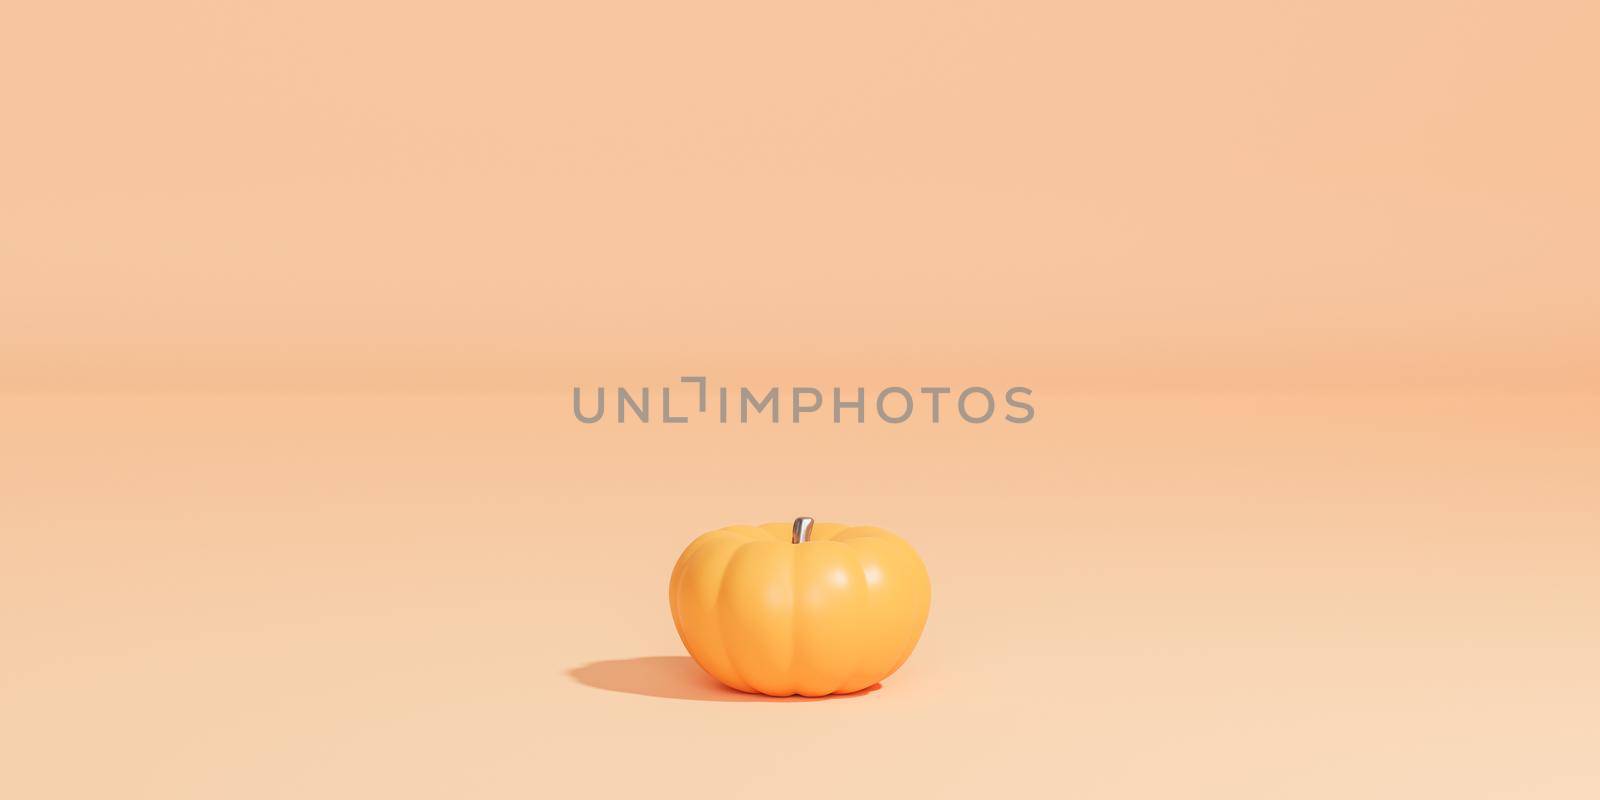 Pumpkin on beige background for advertising on autumn holidays or sales, 3d banner render by Frostroomhead